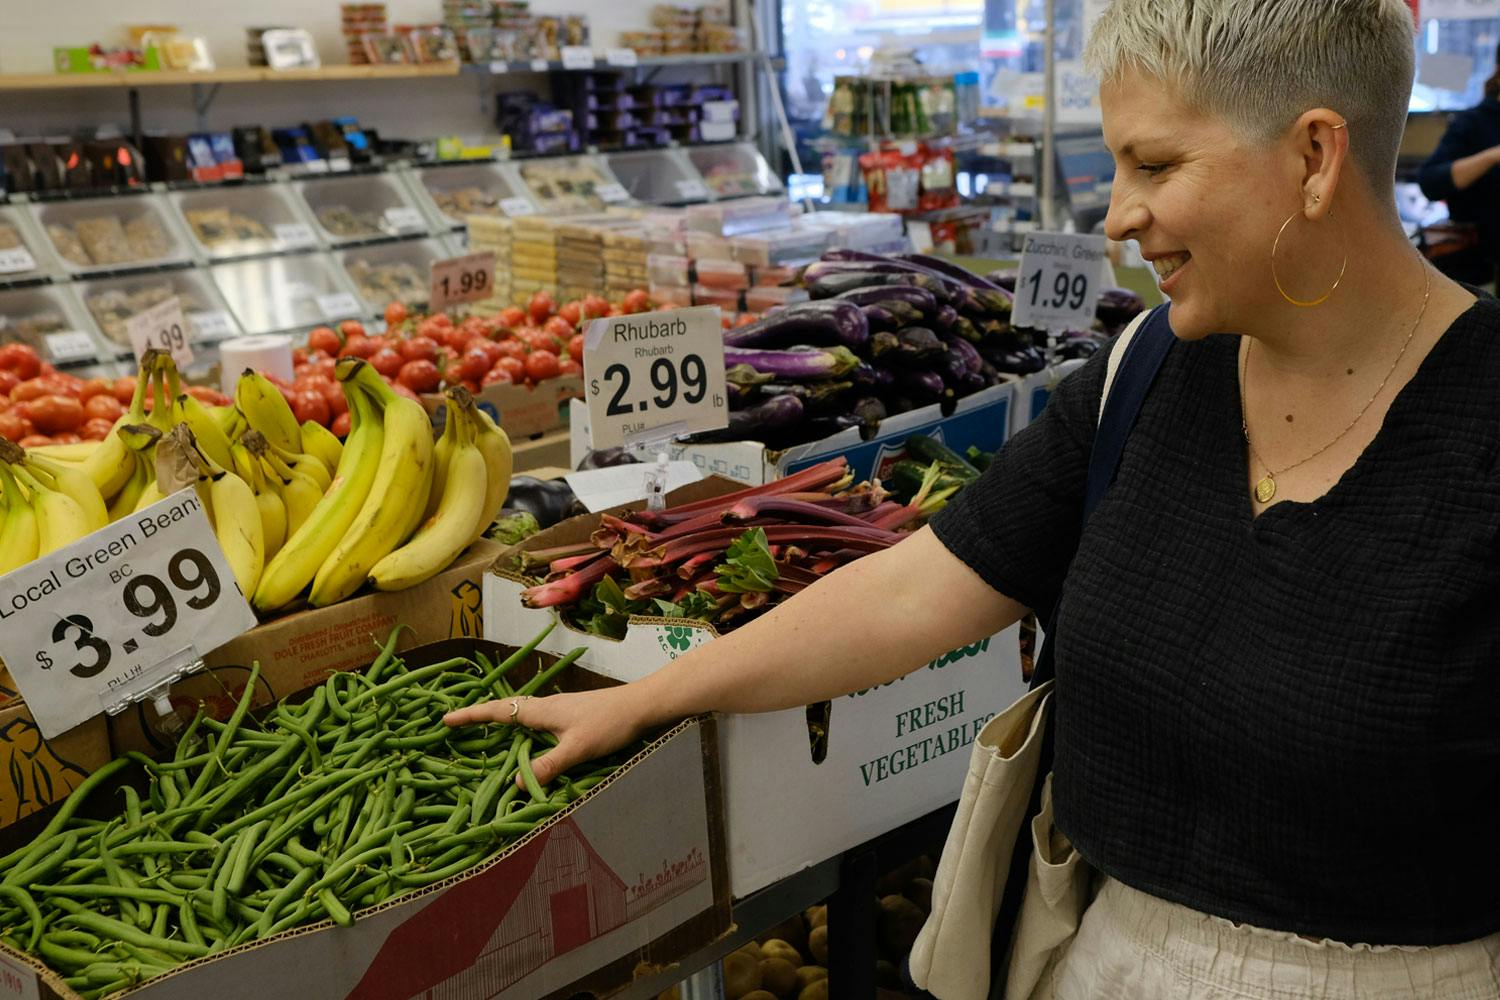 Emily Sproule puts her hand into a box of green beans in a grocery store, near boxes of rhubarb, eggplant, bananas, tomatoes.